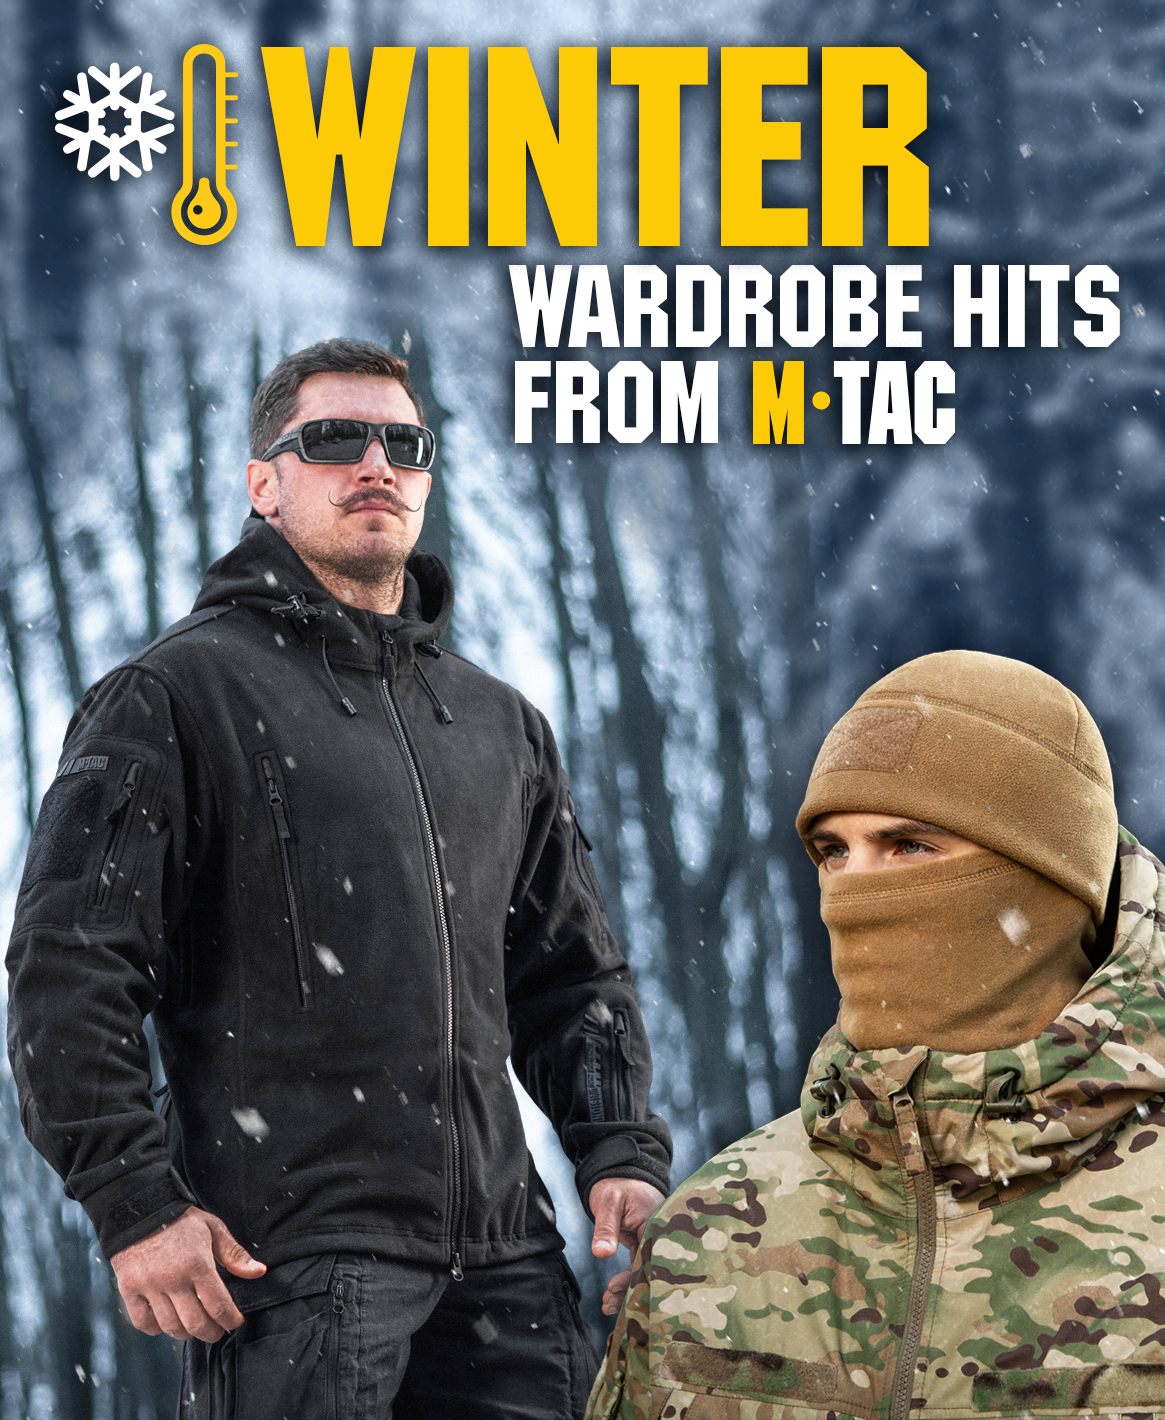 M-TAC - Military & Tactical Clothing Store from Ukraine